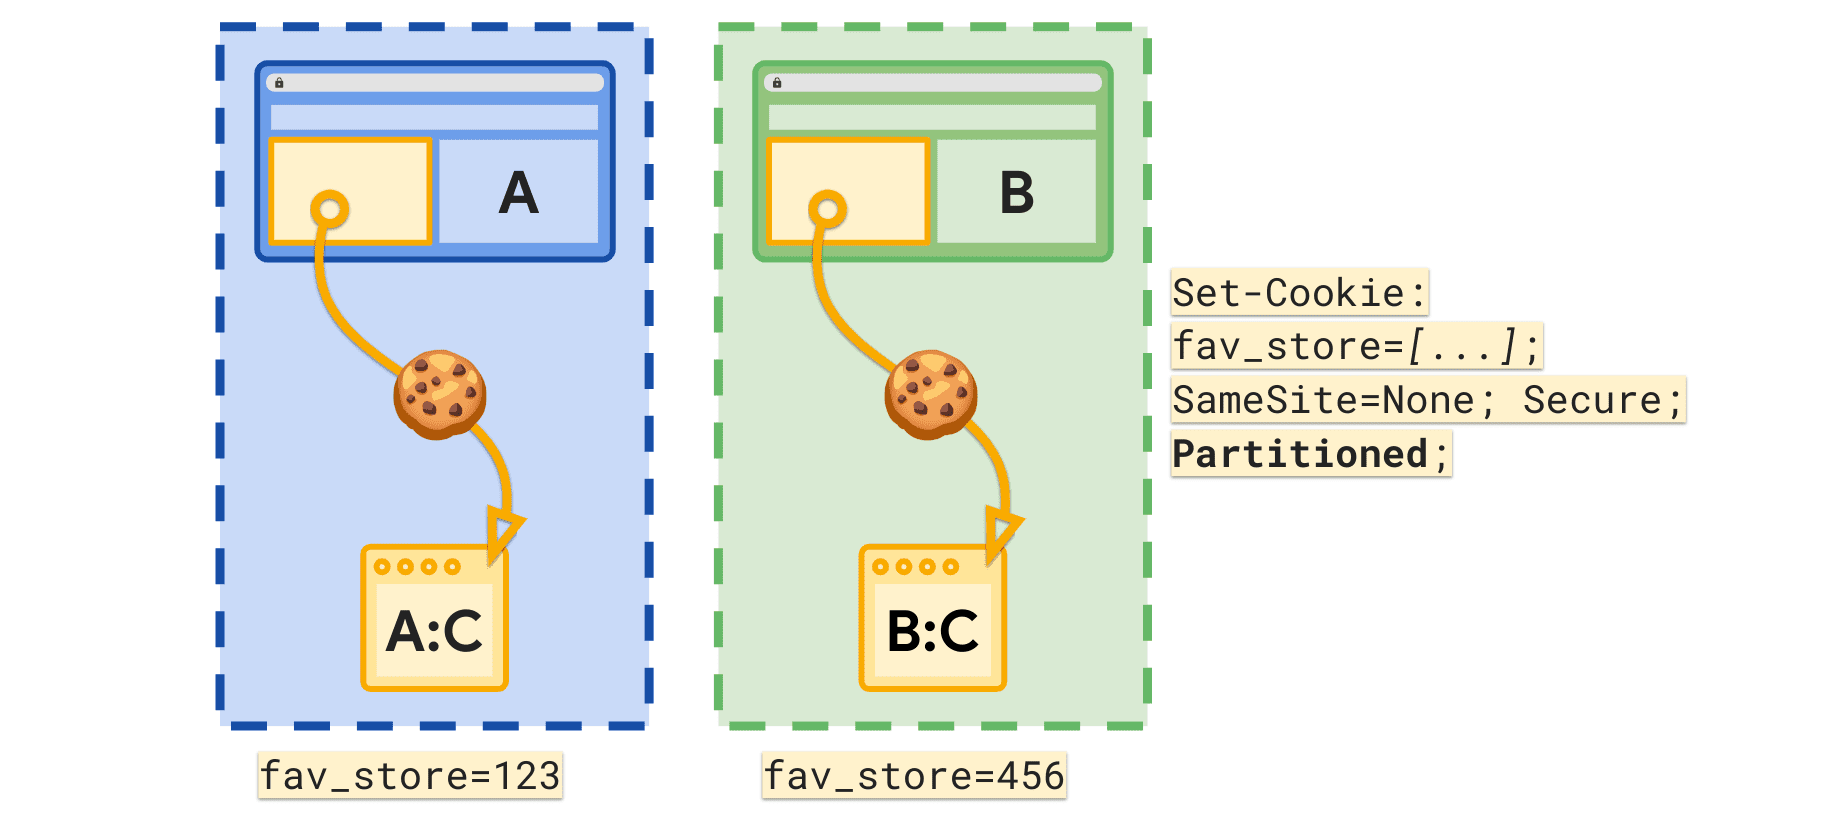 The Partitioned attribute enables a separate fav_store cookie to be set per top-level site.